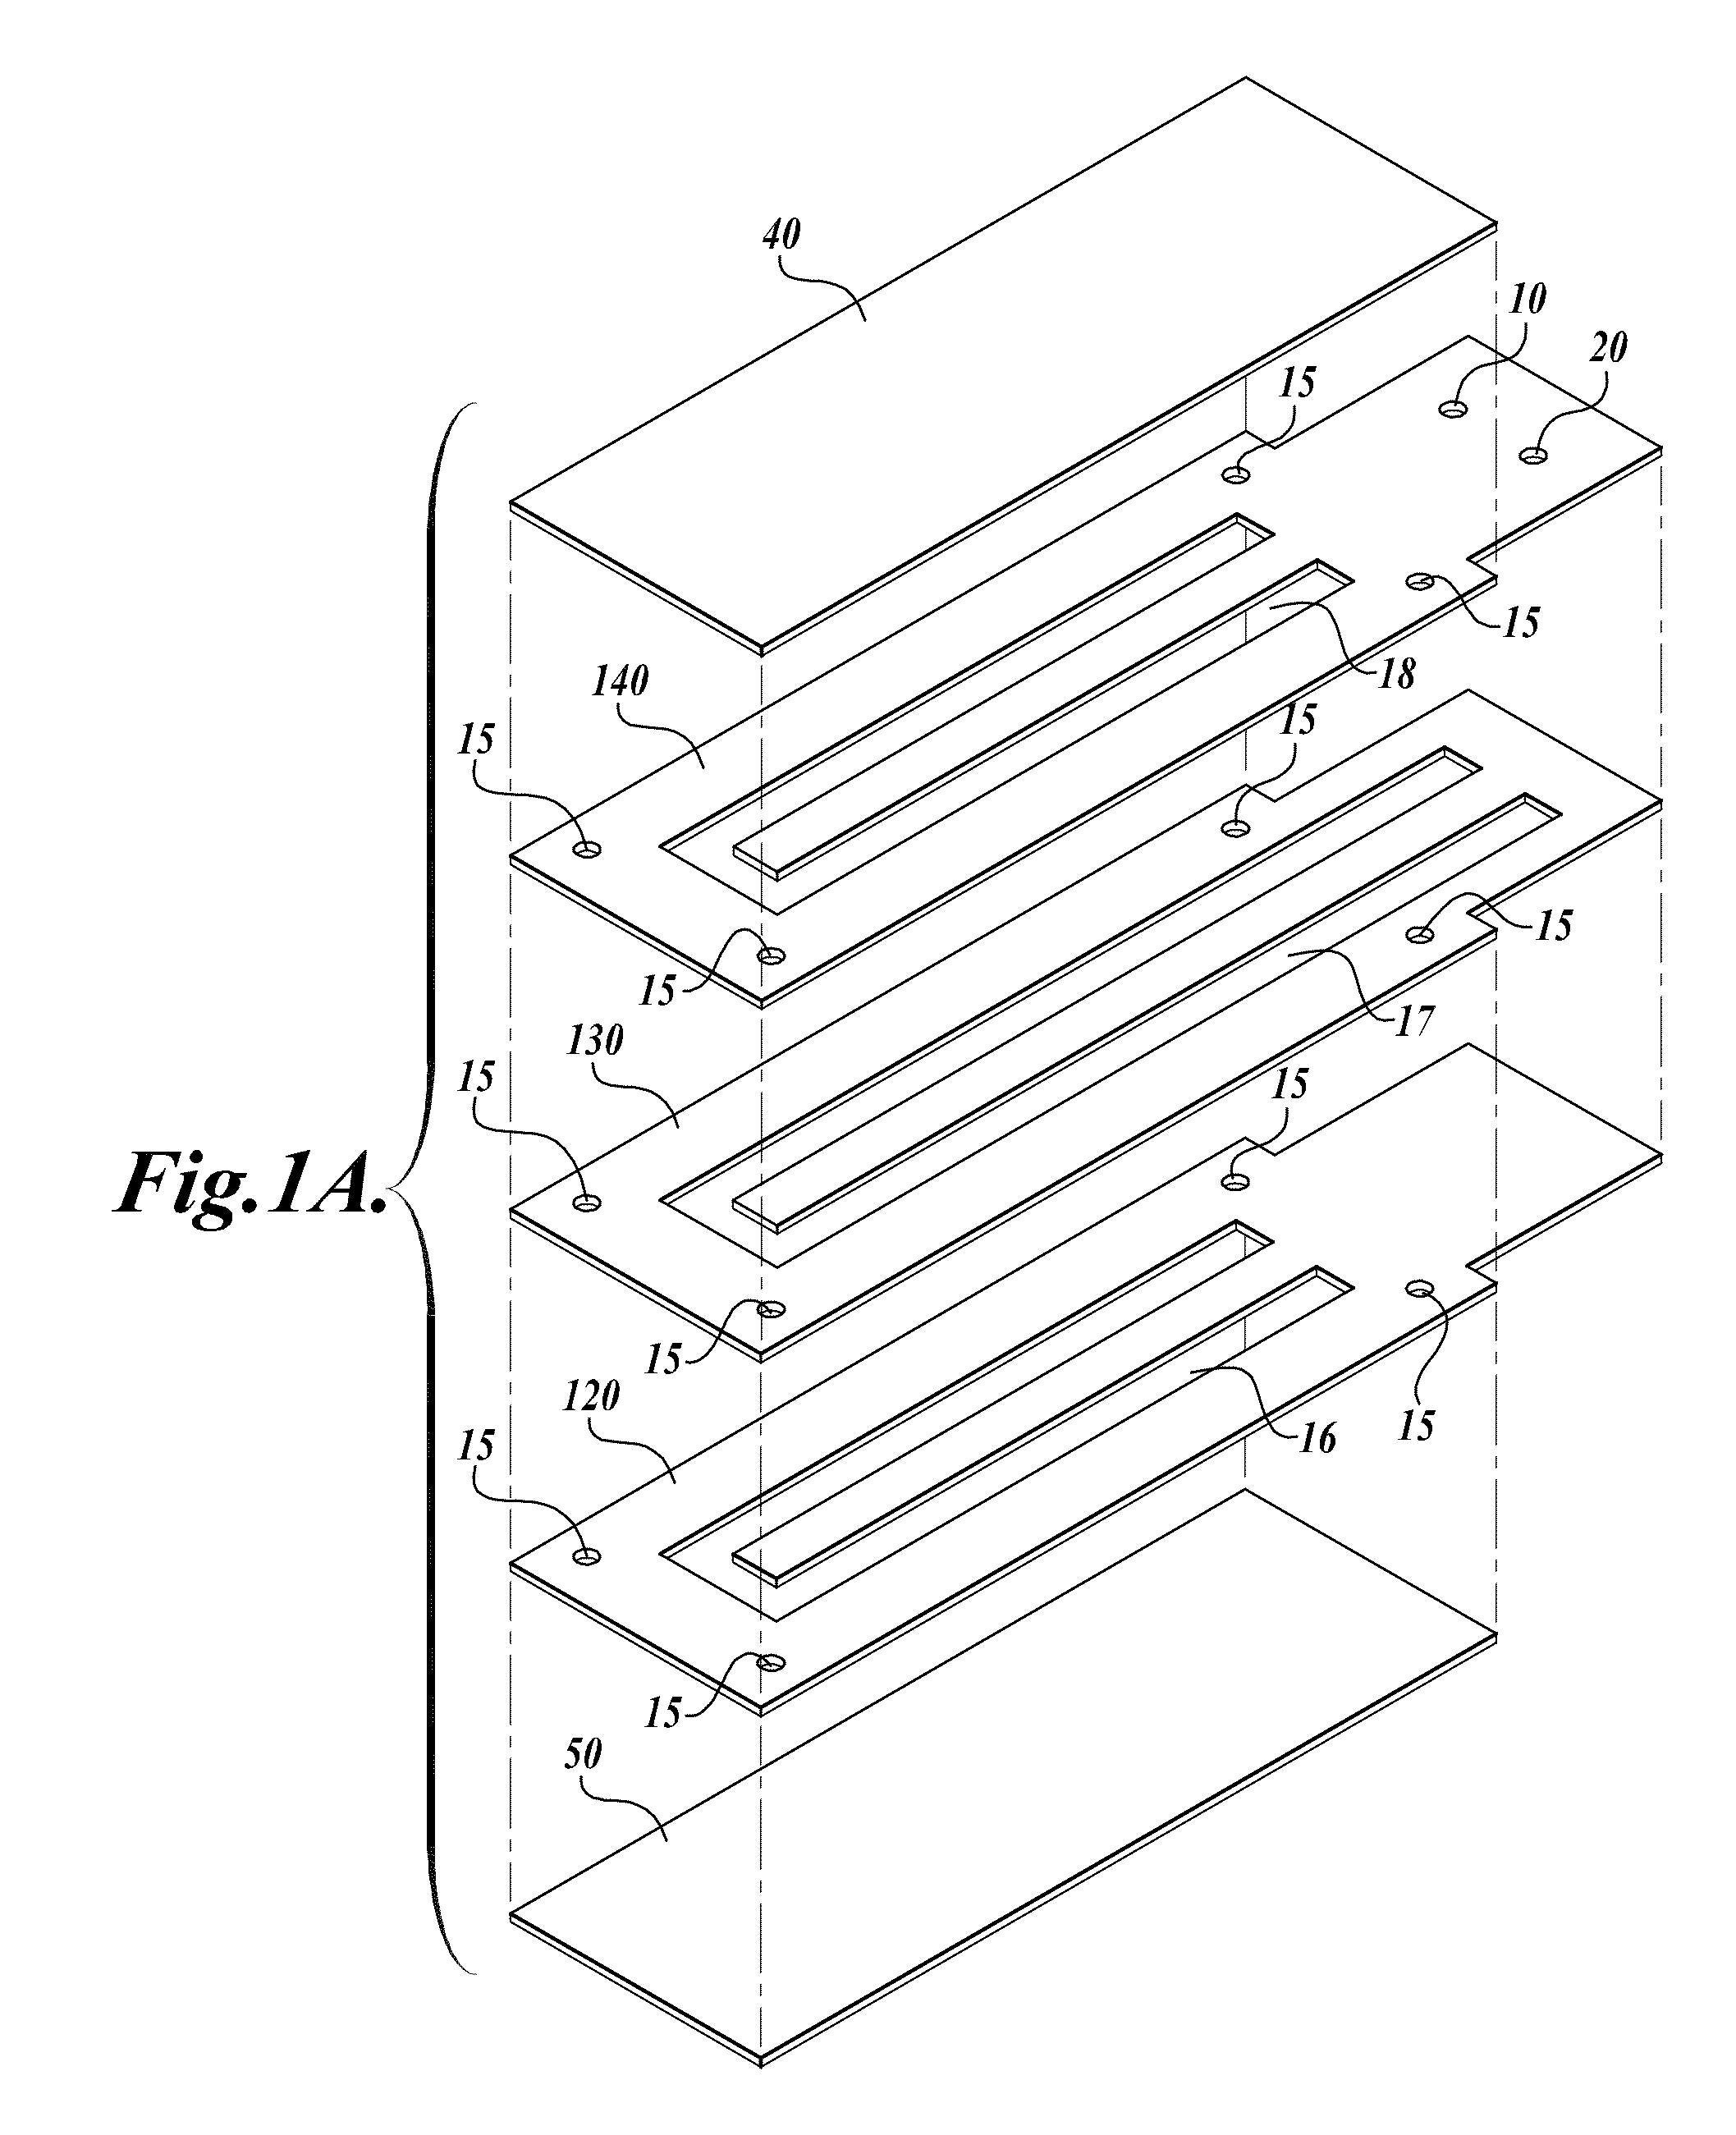 Devices and processes for nucleic acid extraction